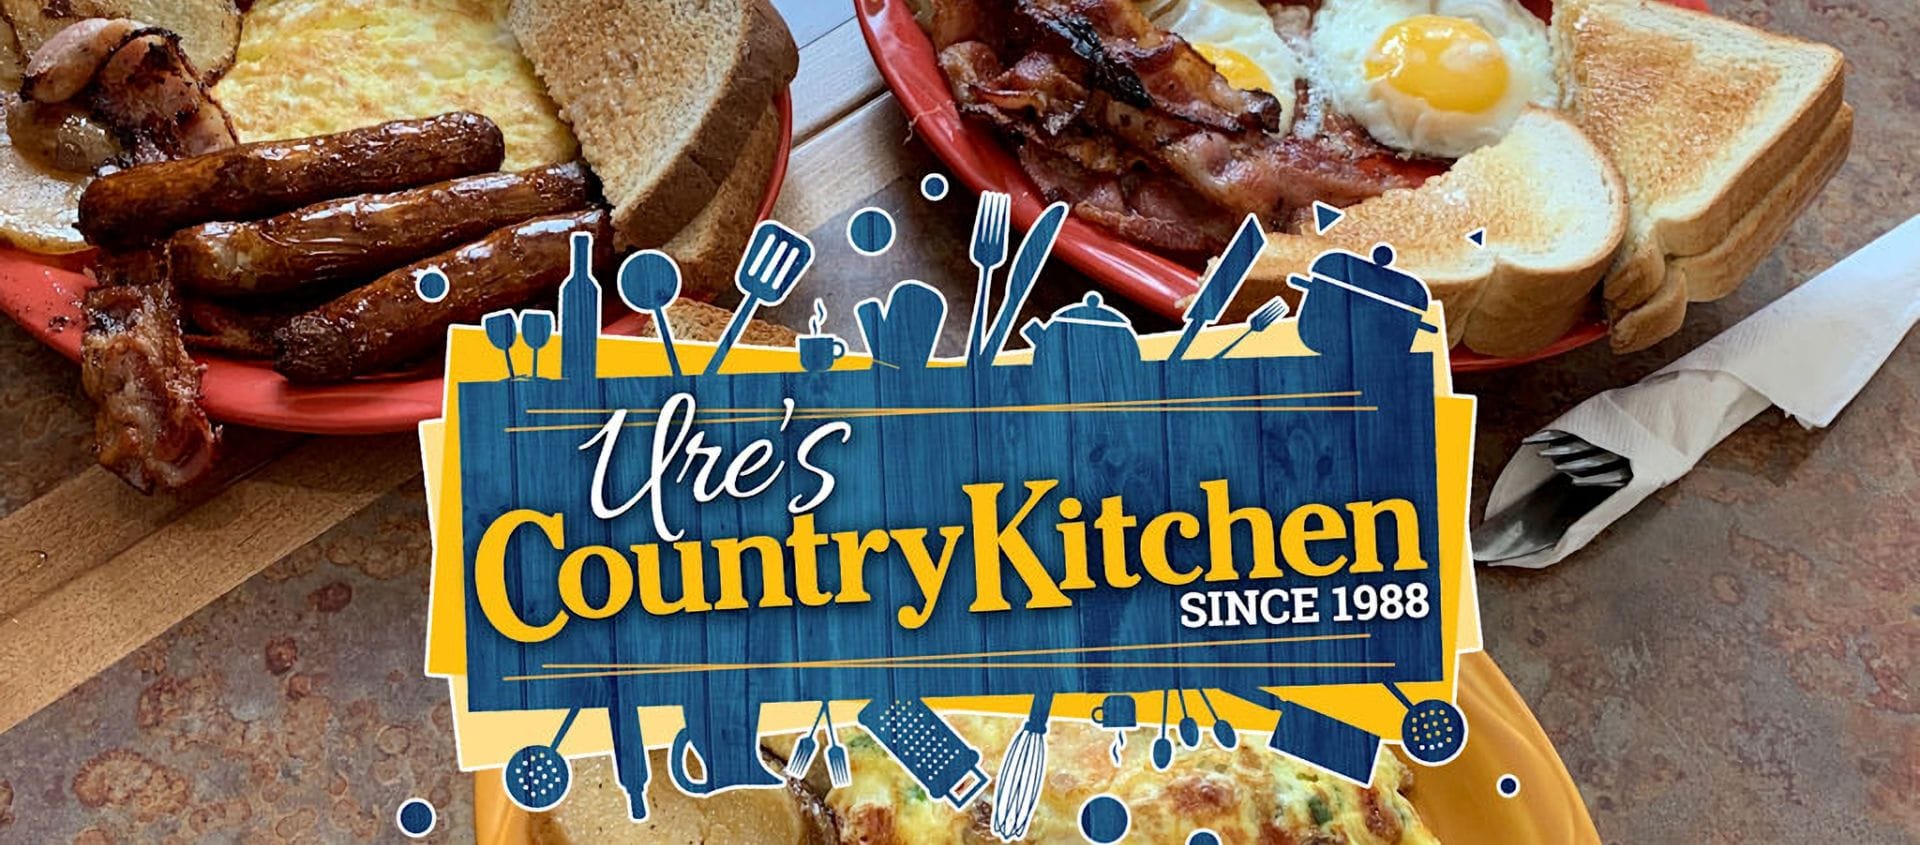 Ure's Country Kitchen with Logo